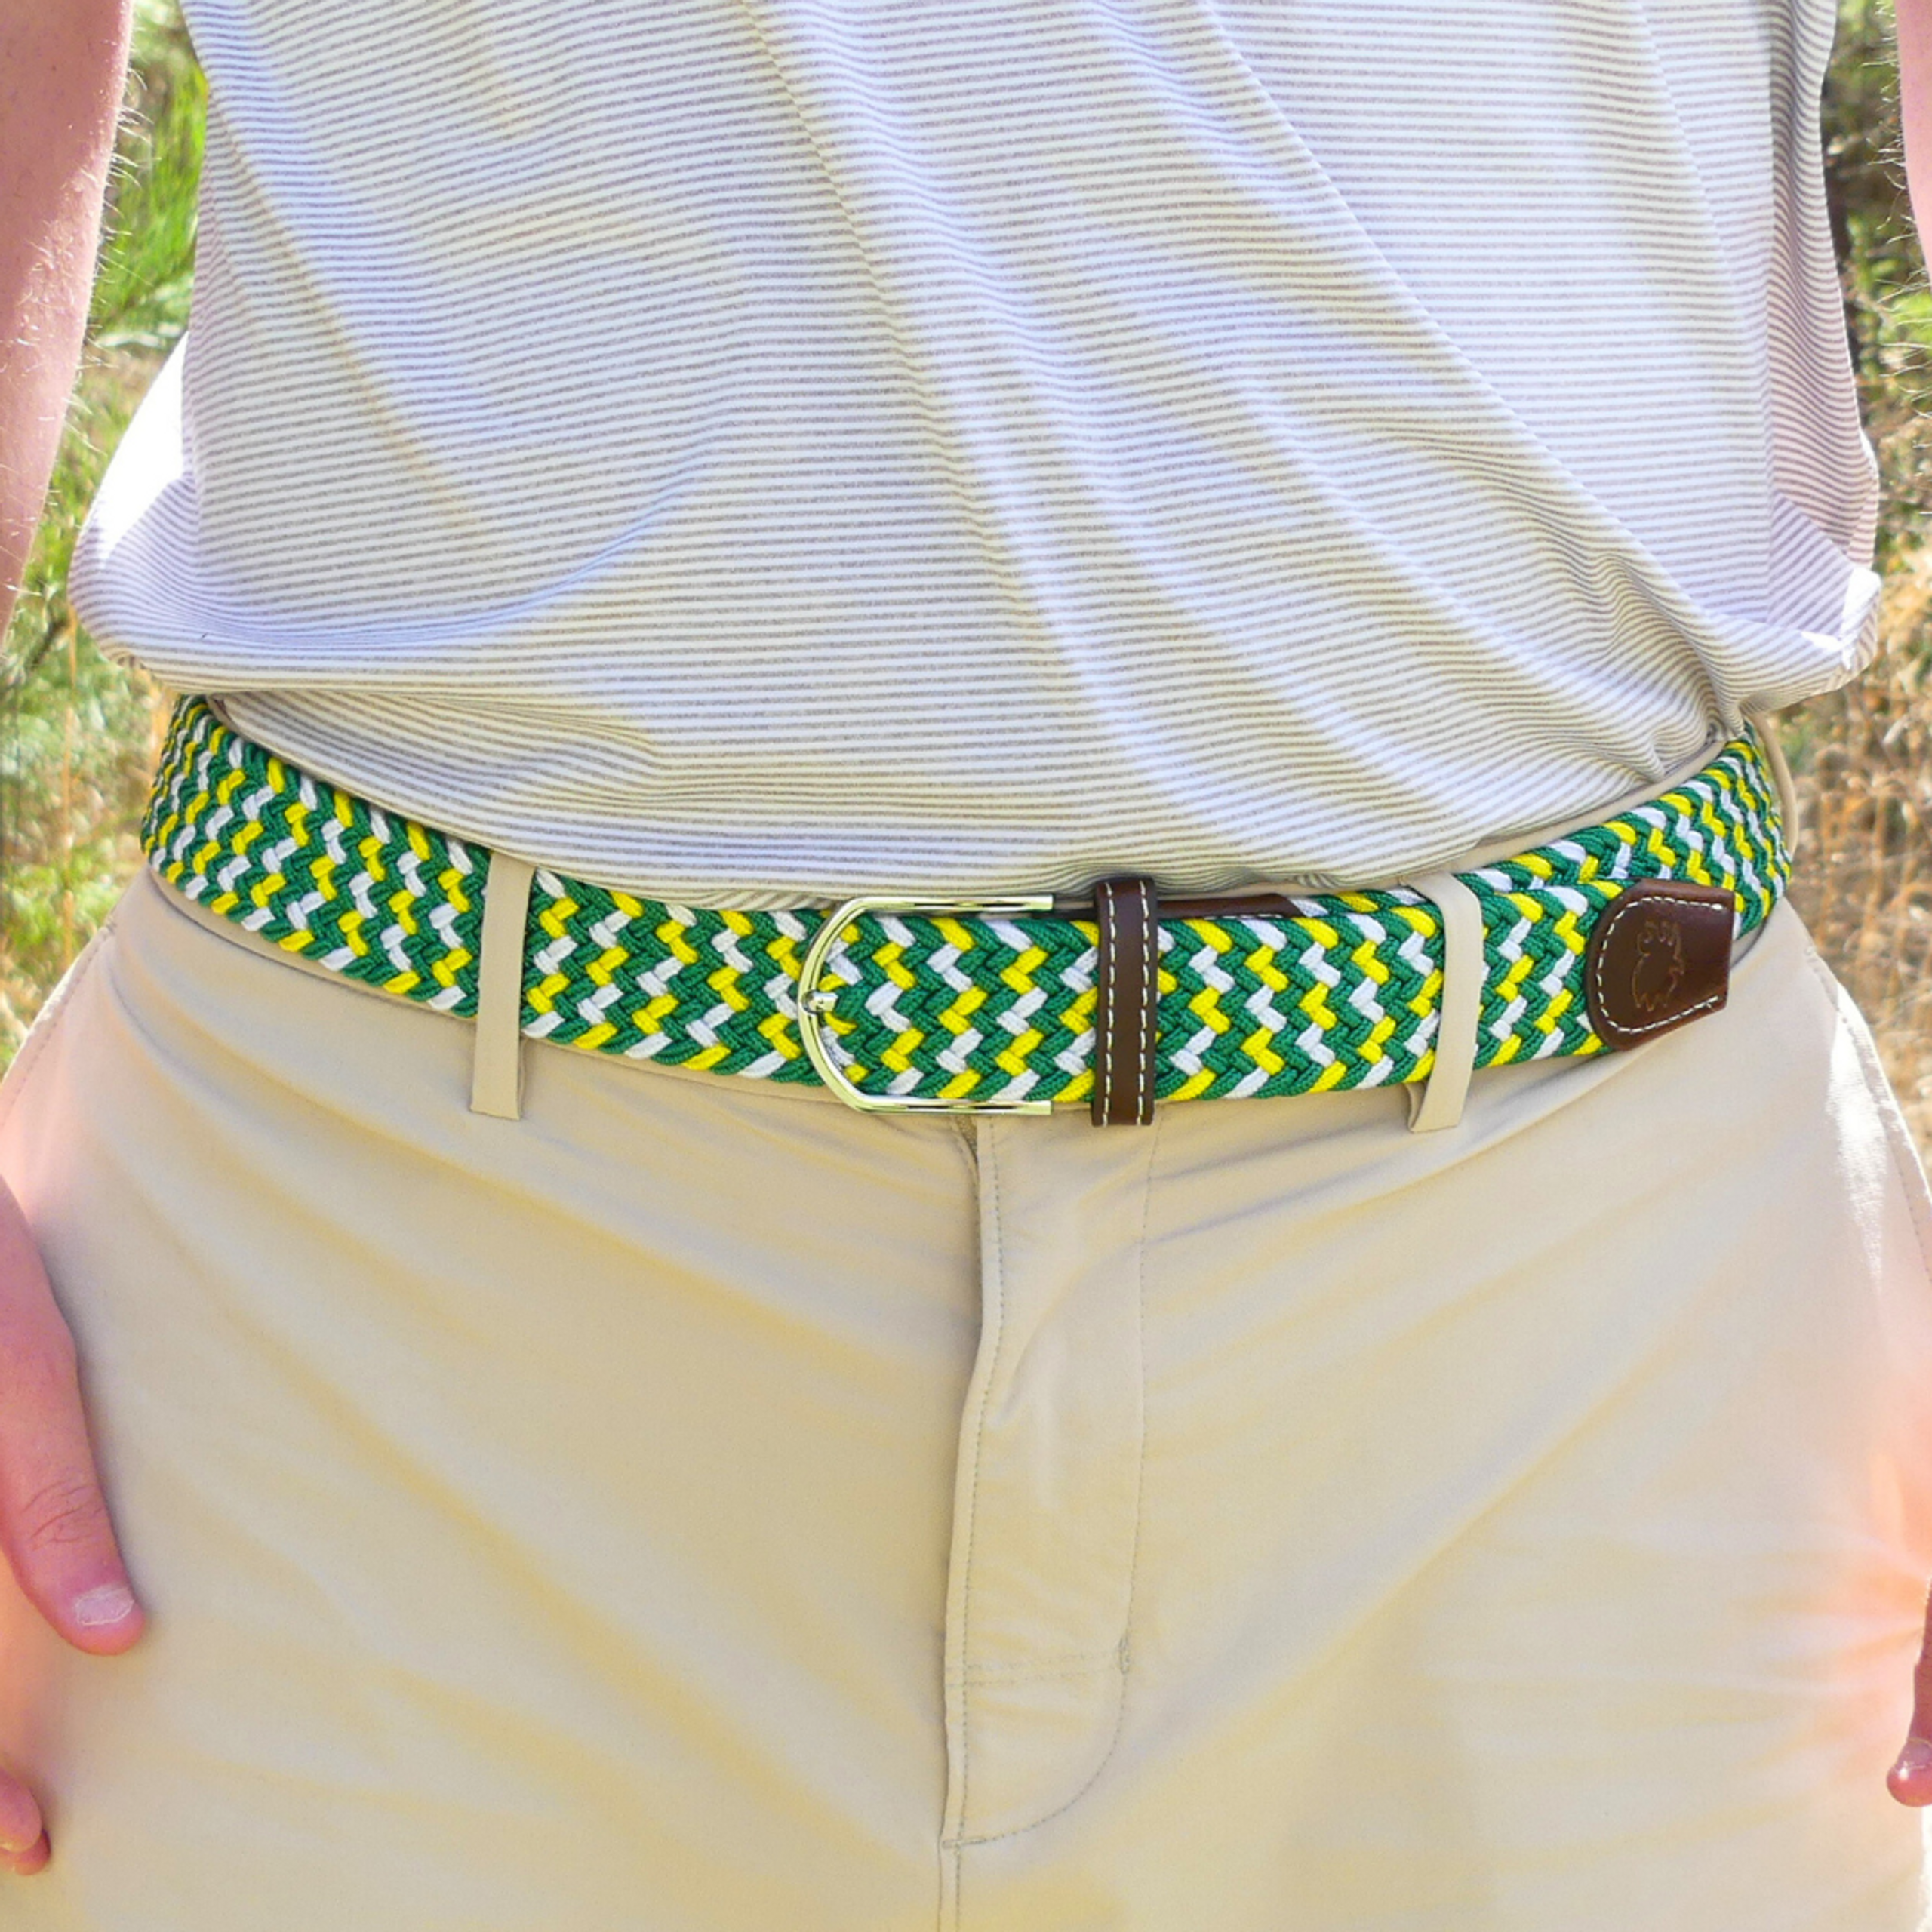 Roostas -The Patron Woven Elastic Stretch Belt